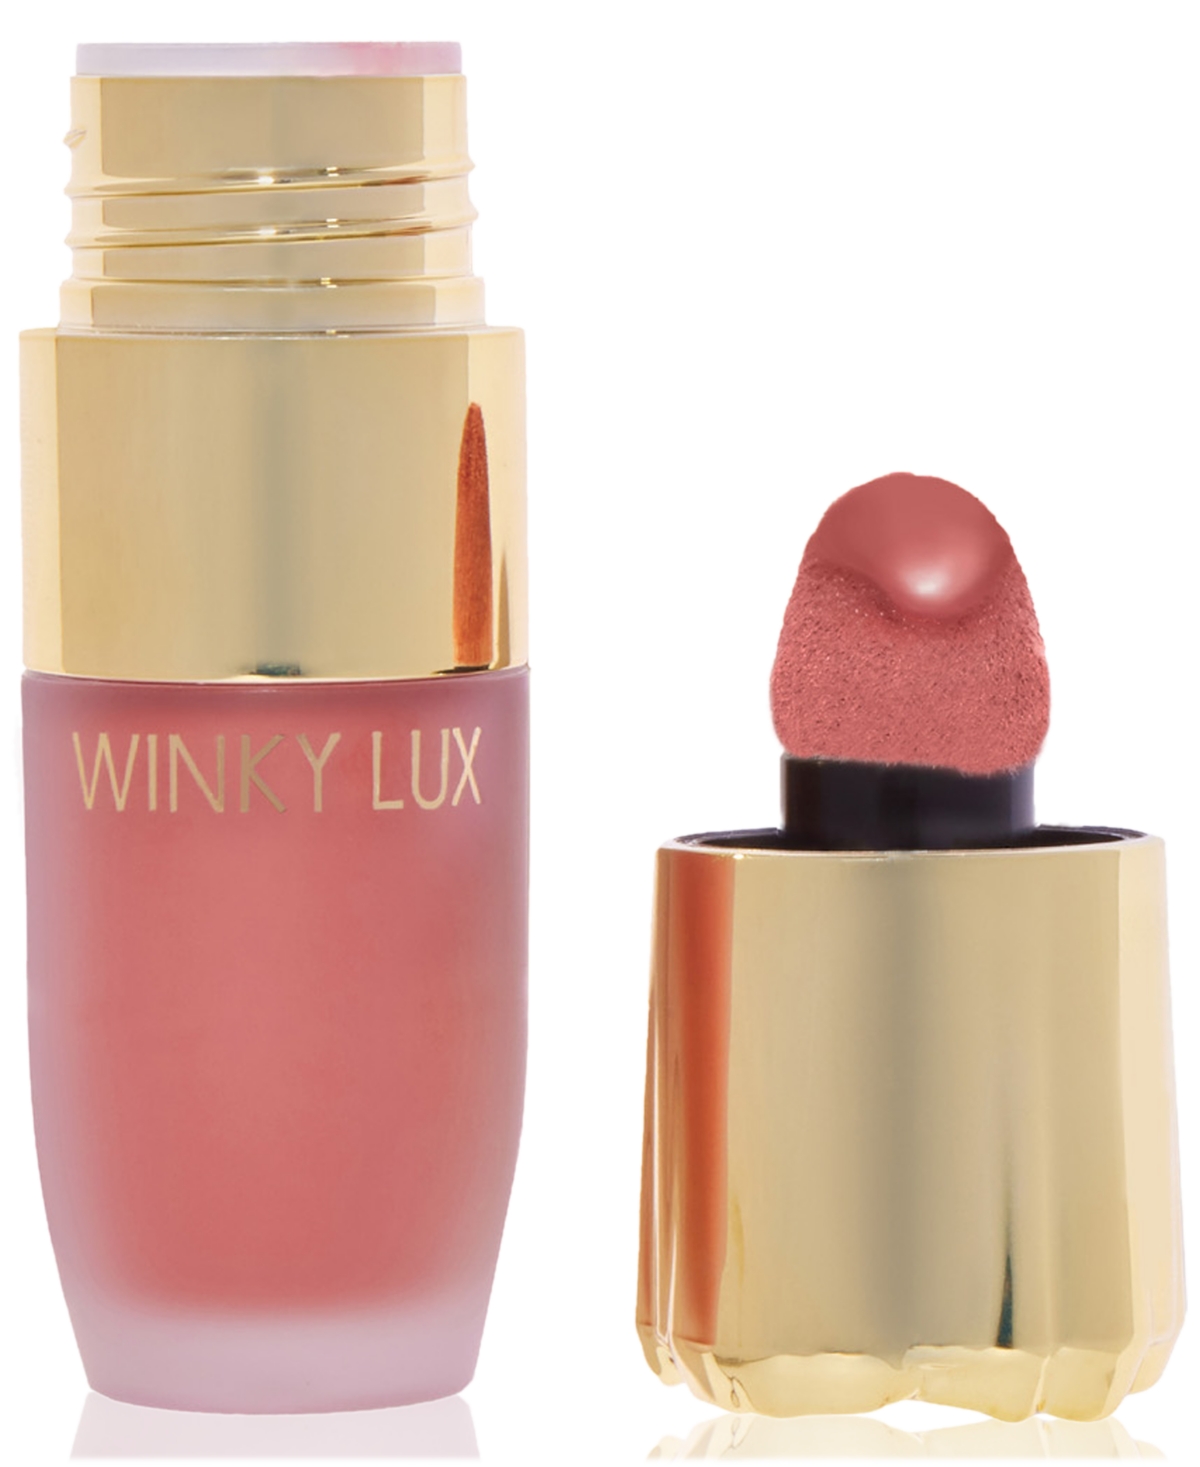 Winky Lux Cheeky Rose Liquid Blush In Noble